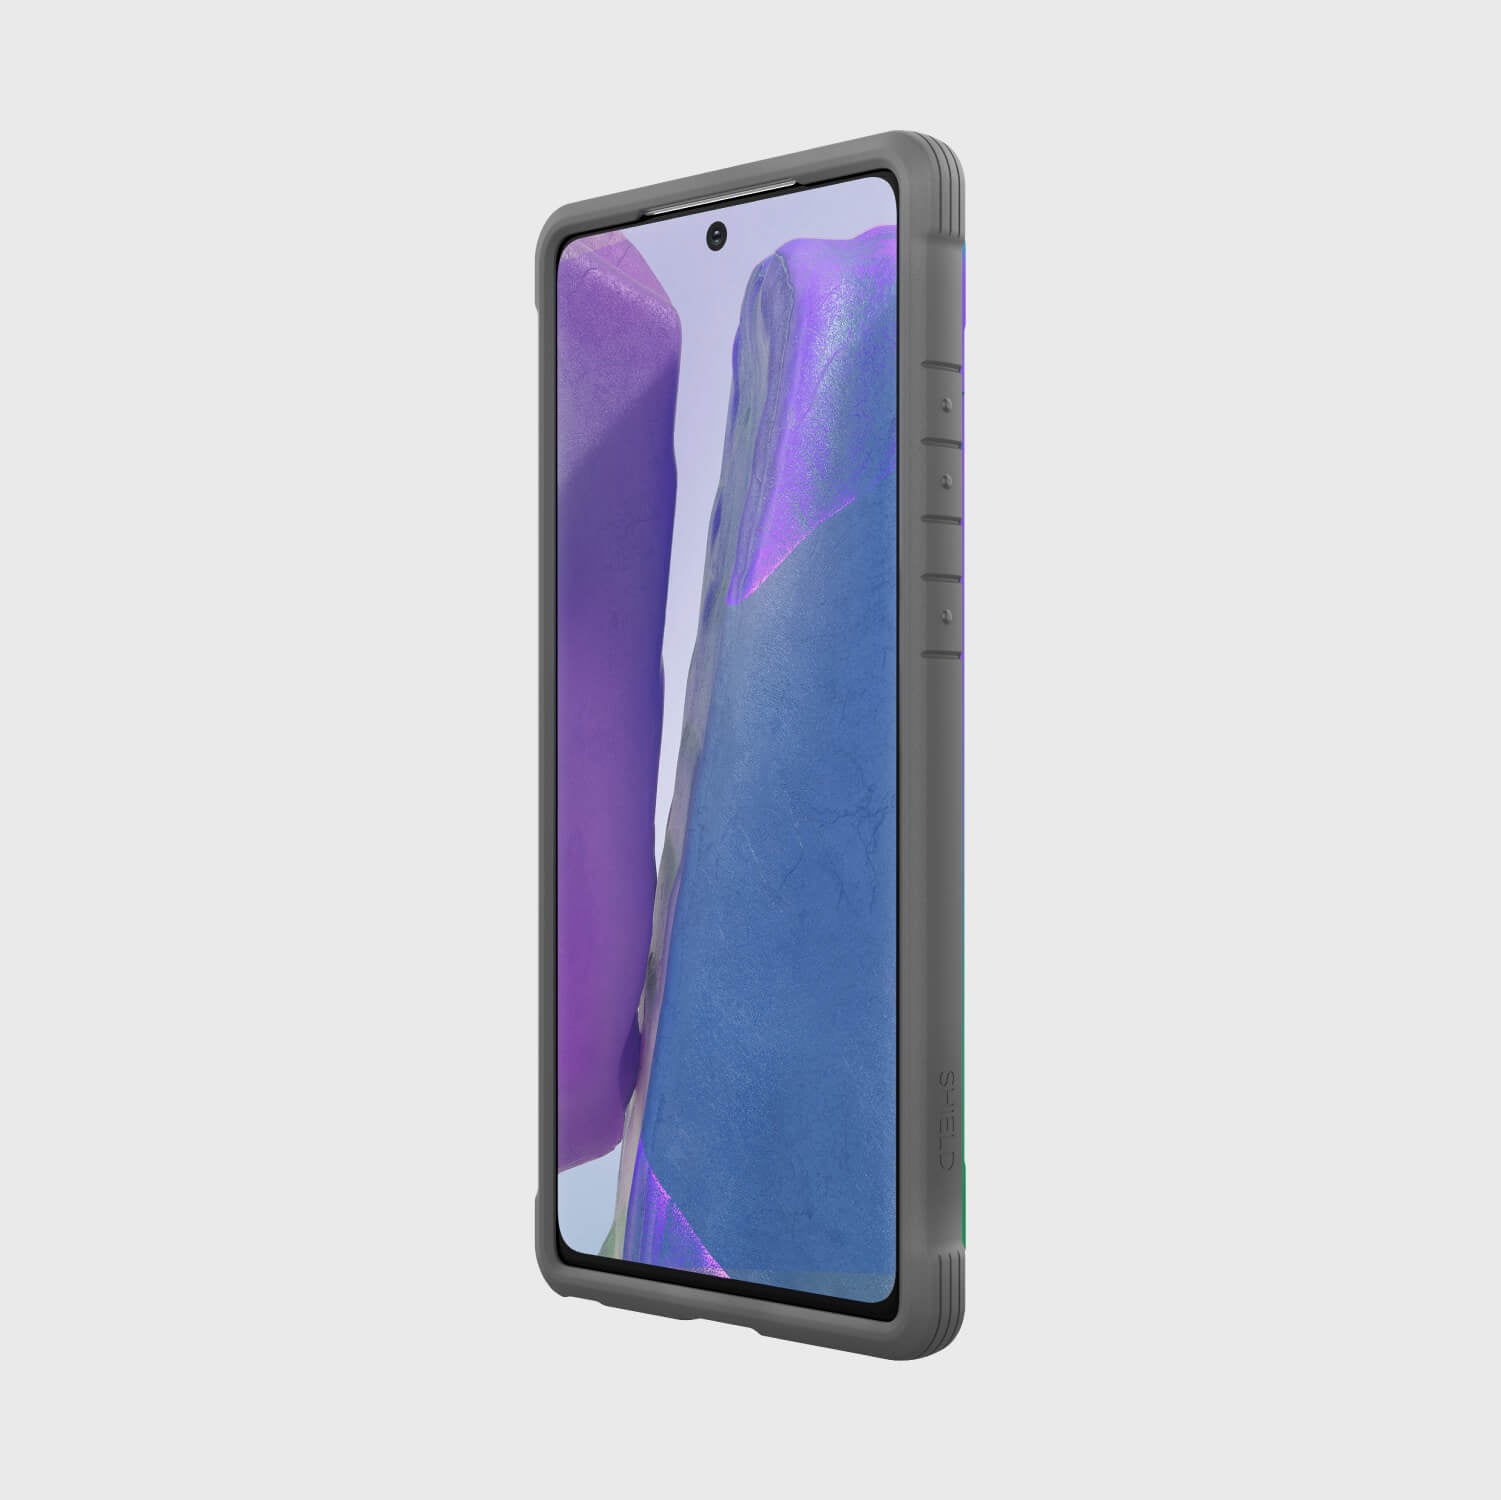 The Raptic Samsung Galaxy Note 20 Case - SHIELD Iridescent is shown in purple and blue. It offers wireless charging compatibility and features drop protection.